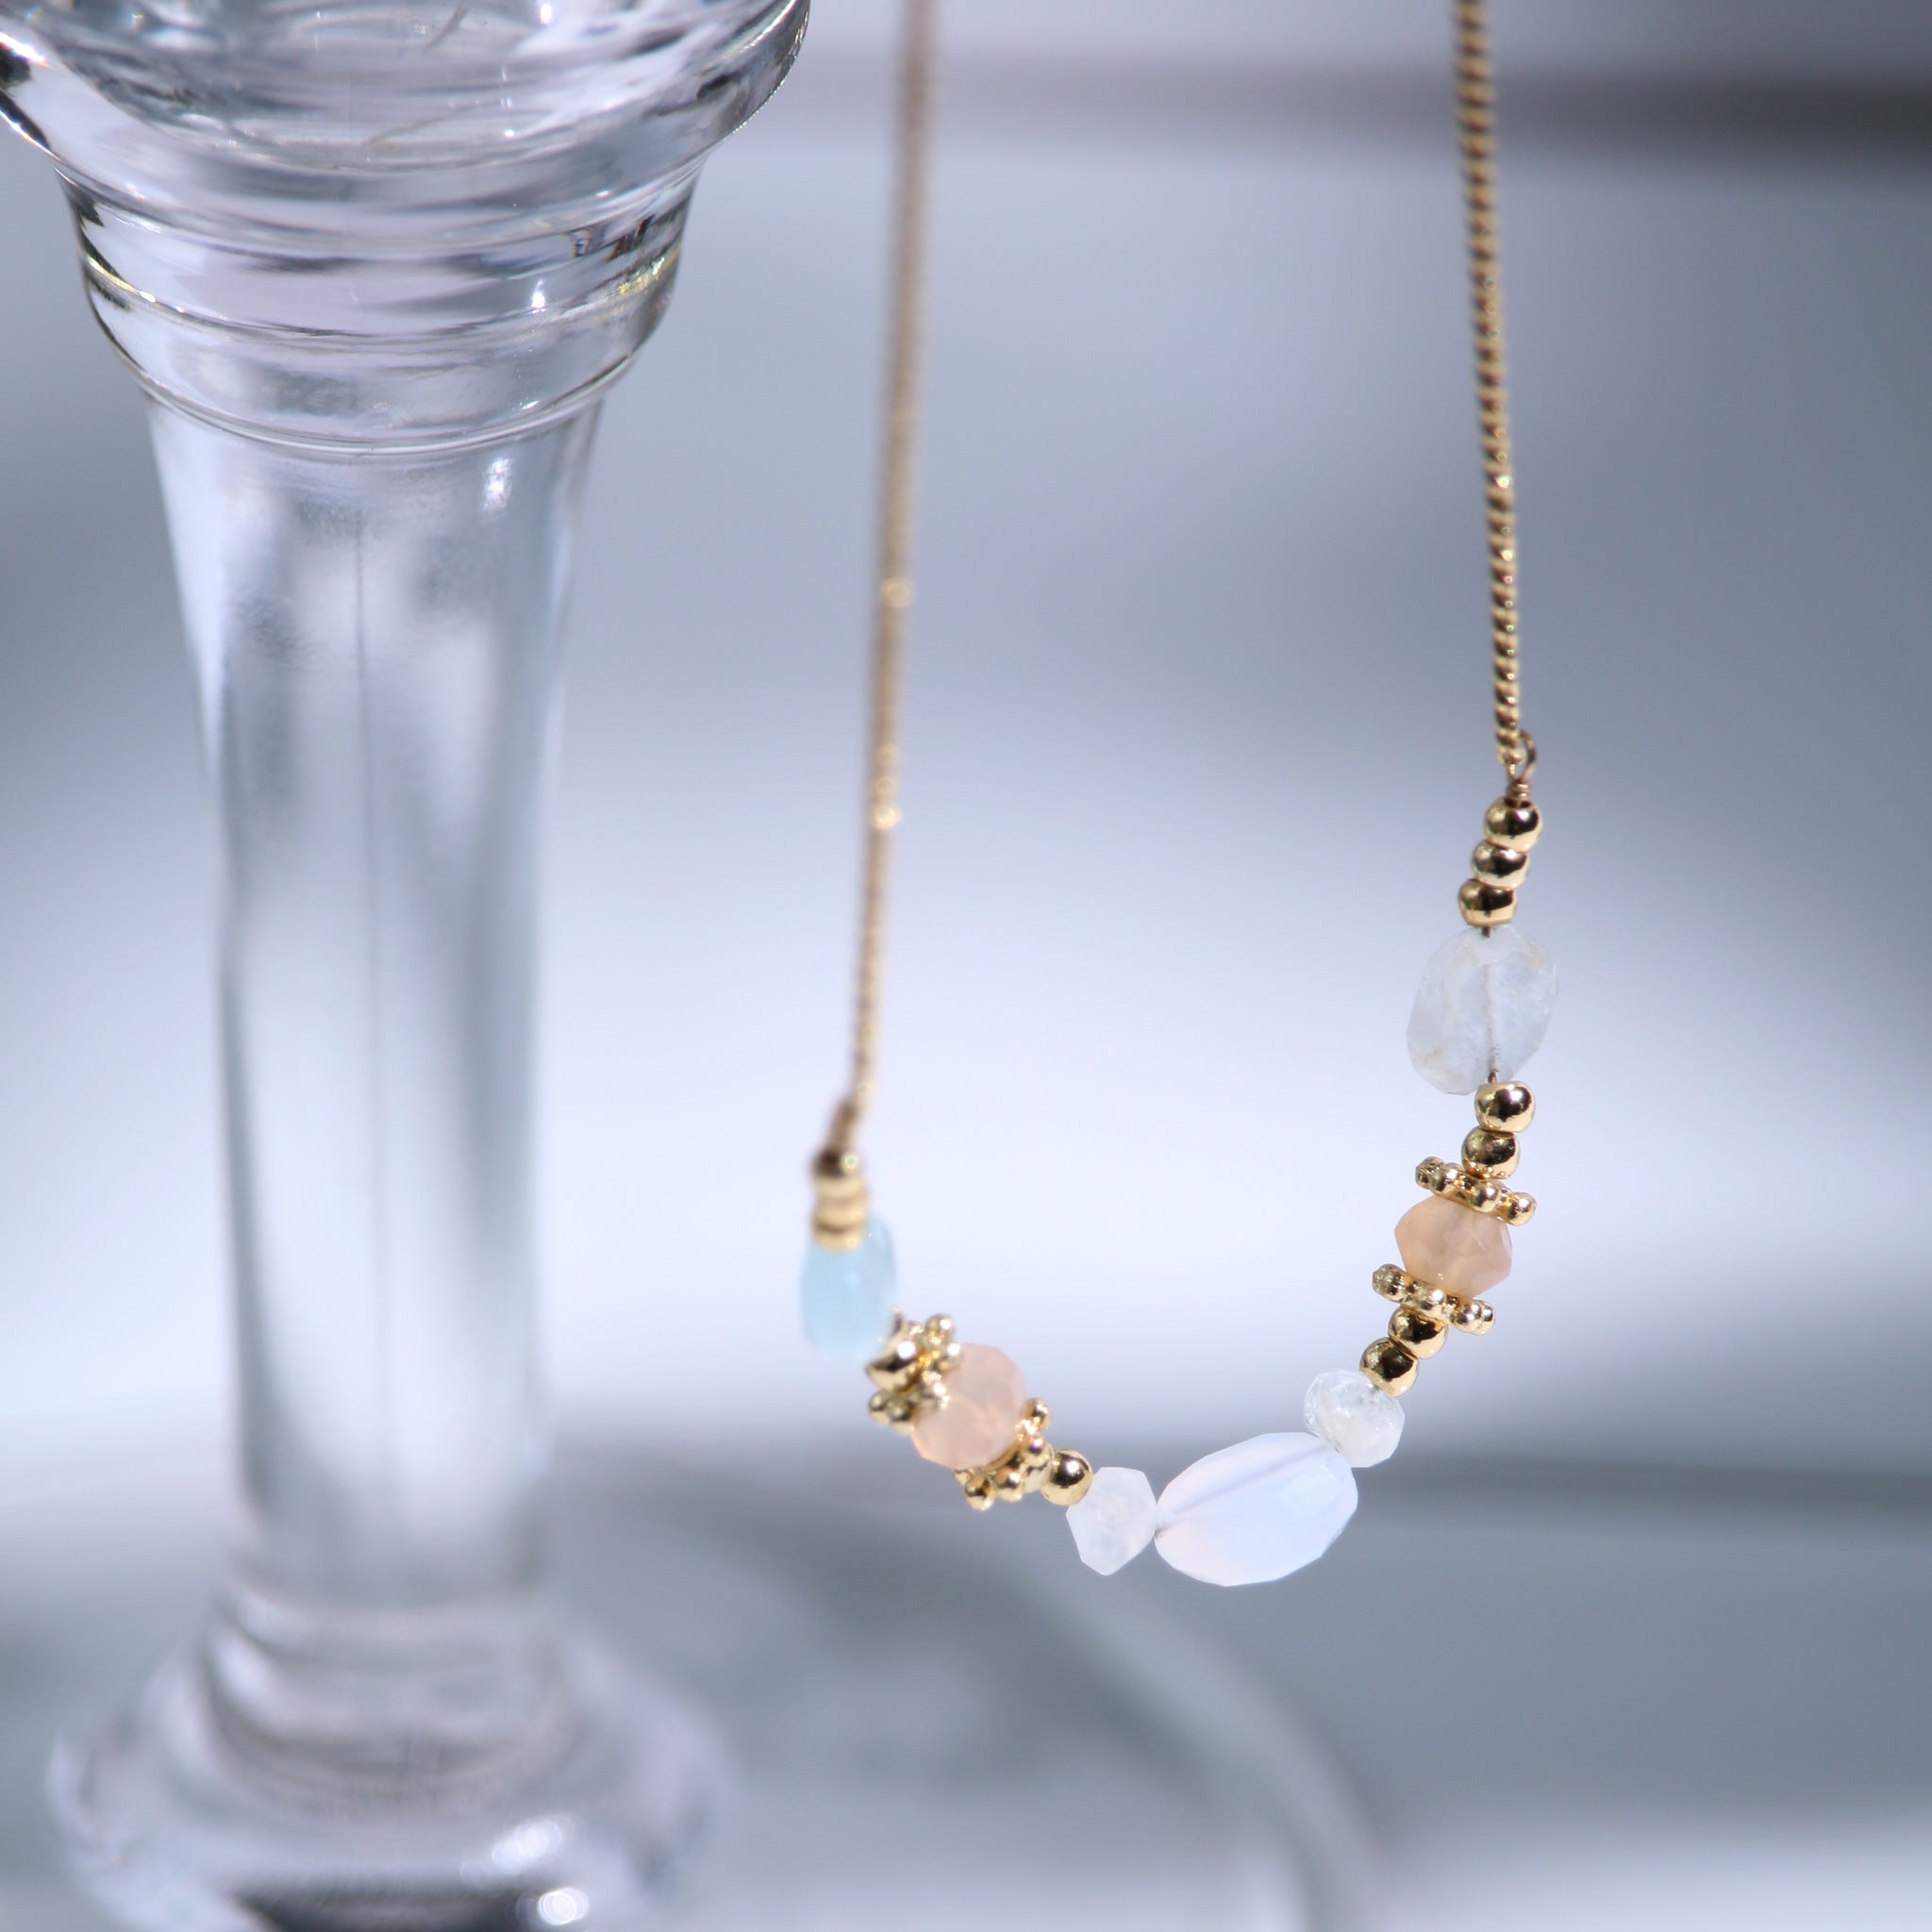 Motif necklace of White Calcedney and White Moonstone